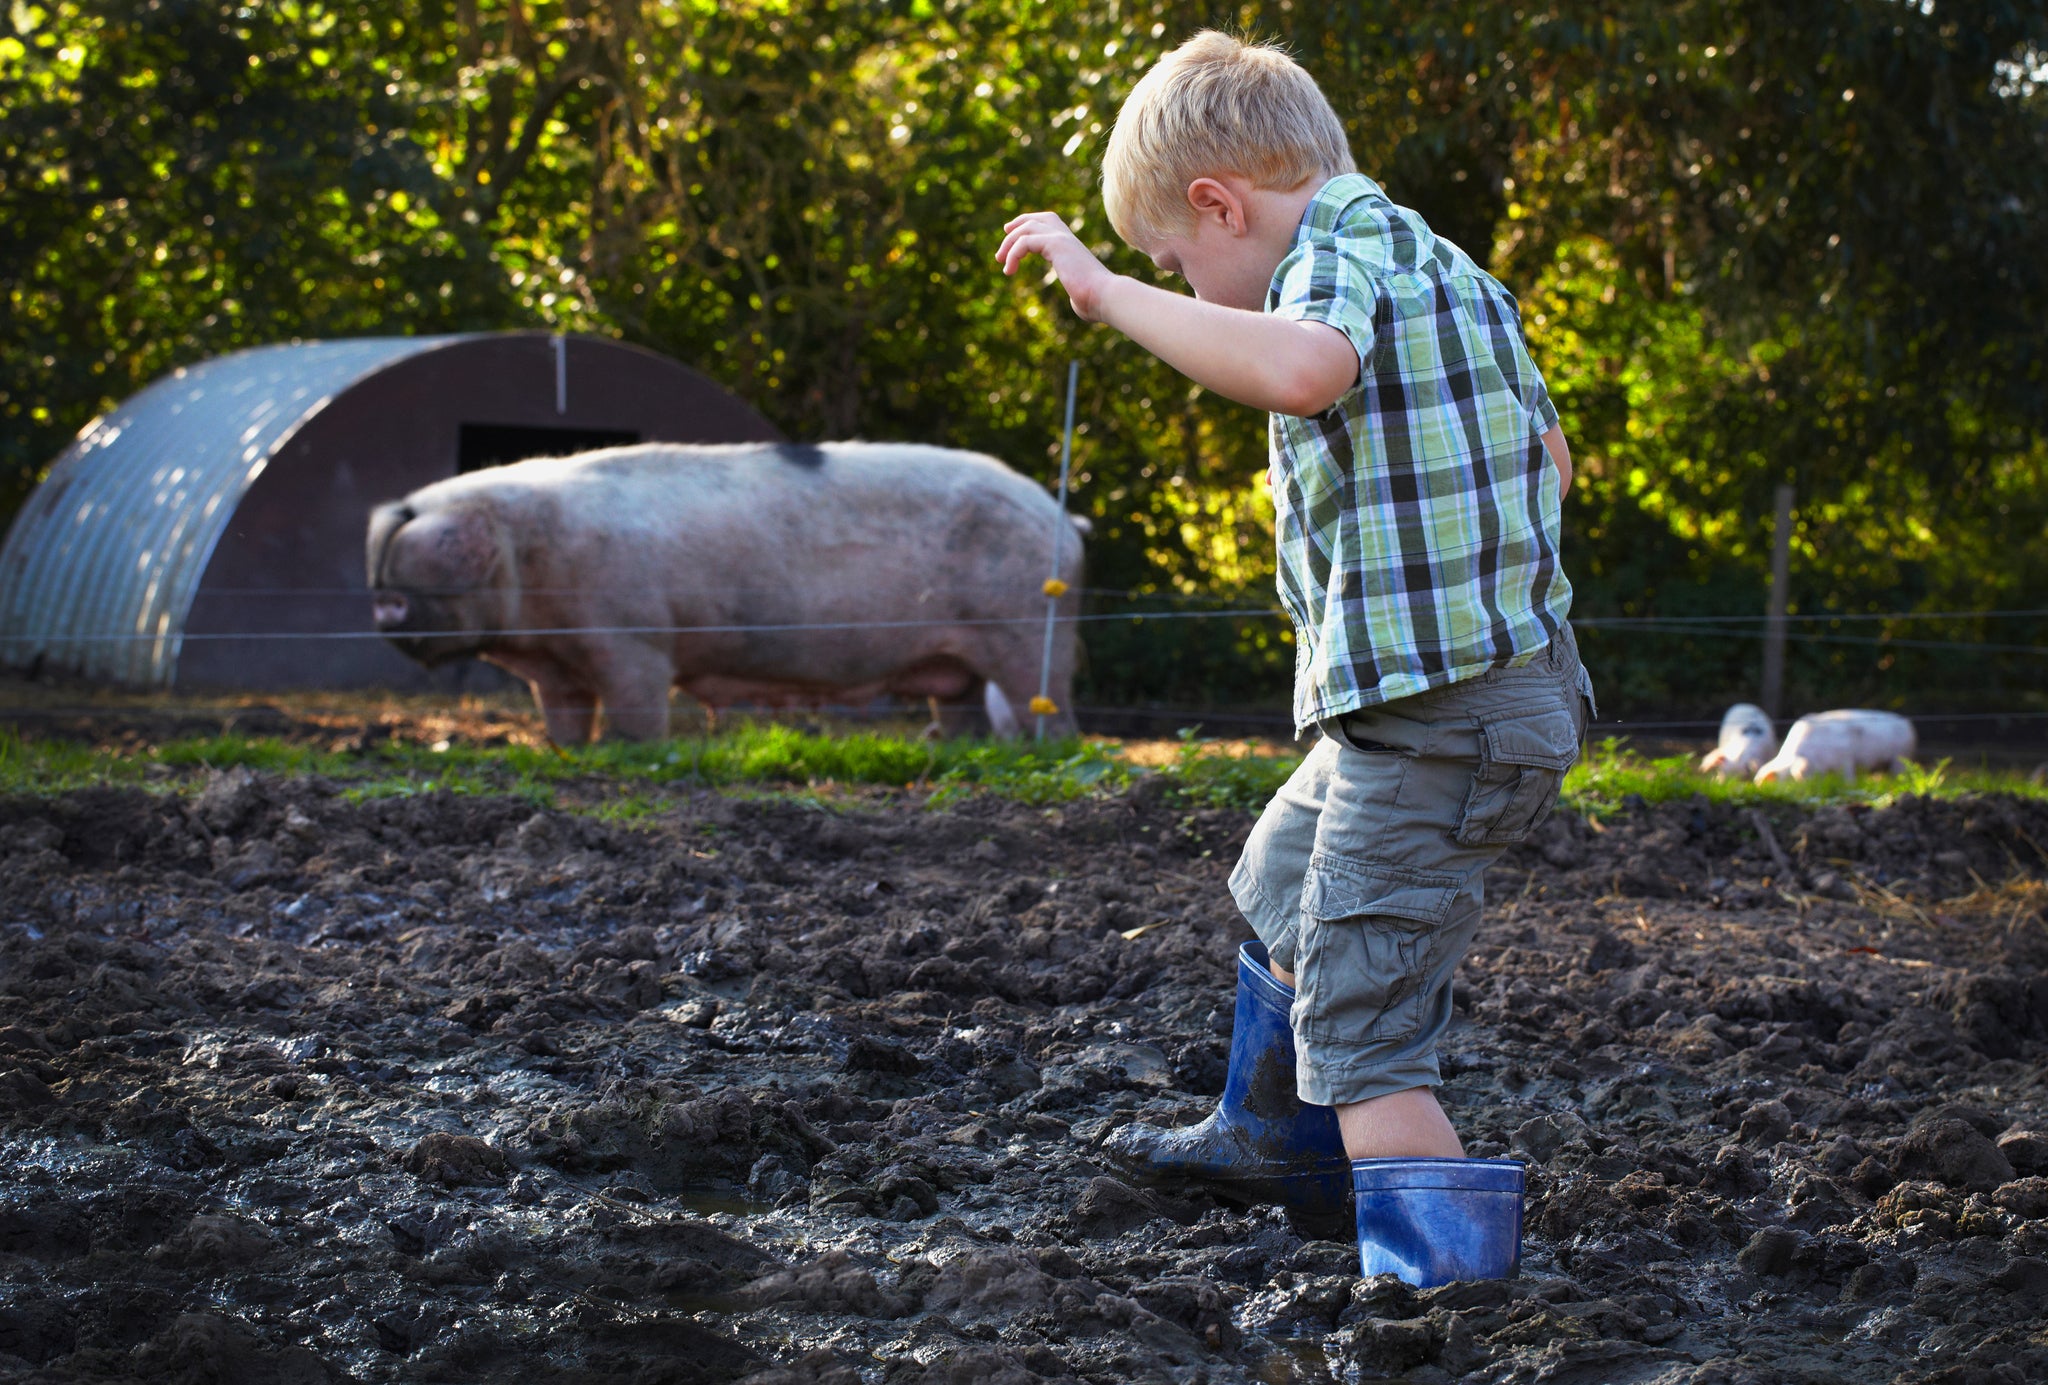 Researchers say growing up on a farm may reduce the risk of developing inflammatory bowel disease